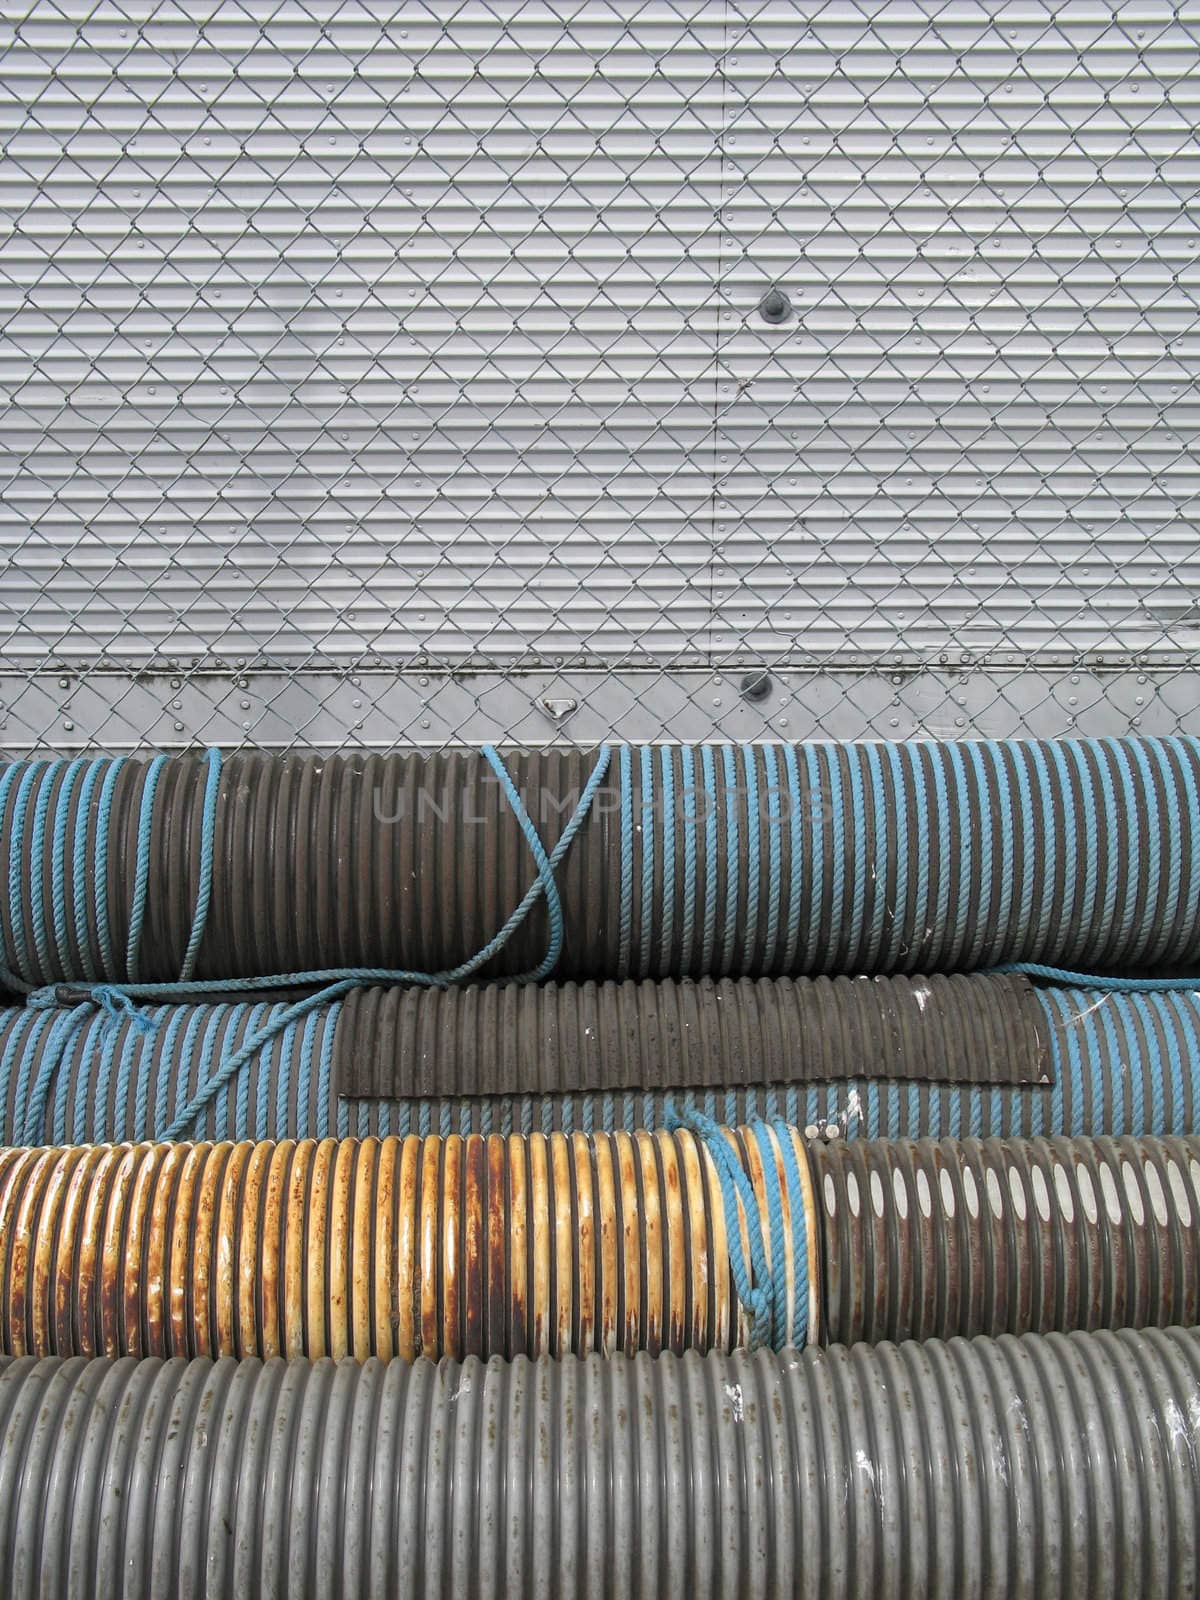 industrial pipes by mmm